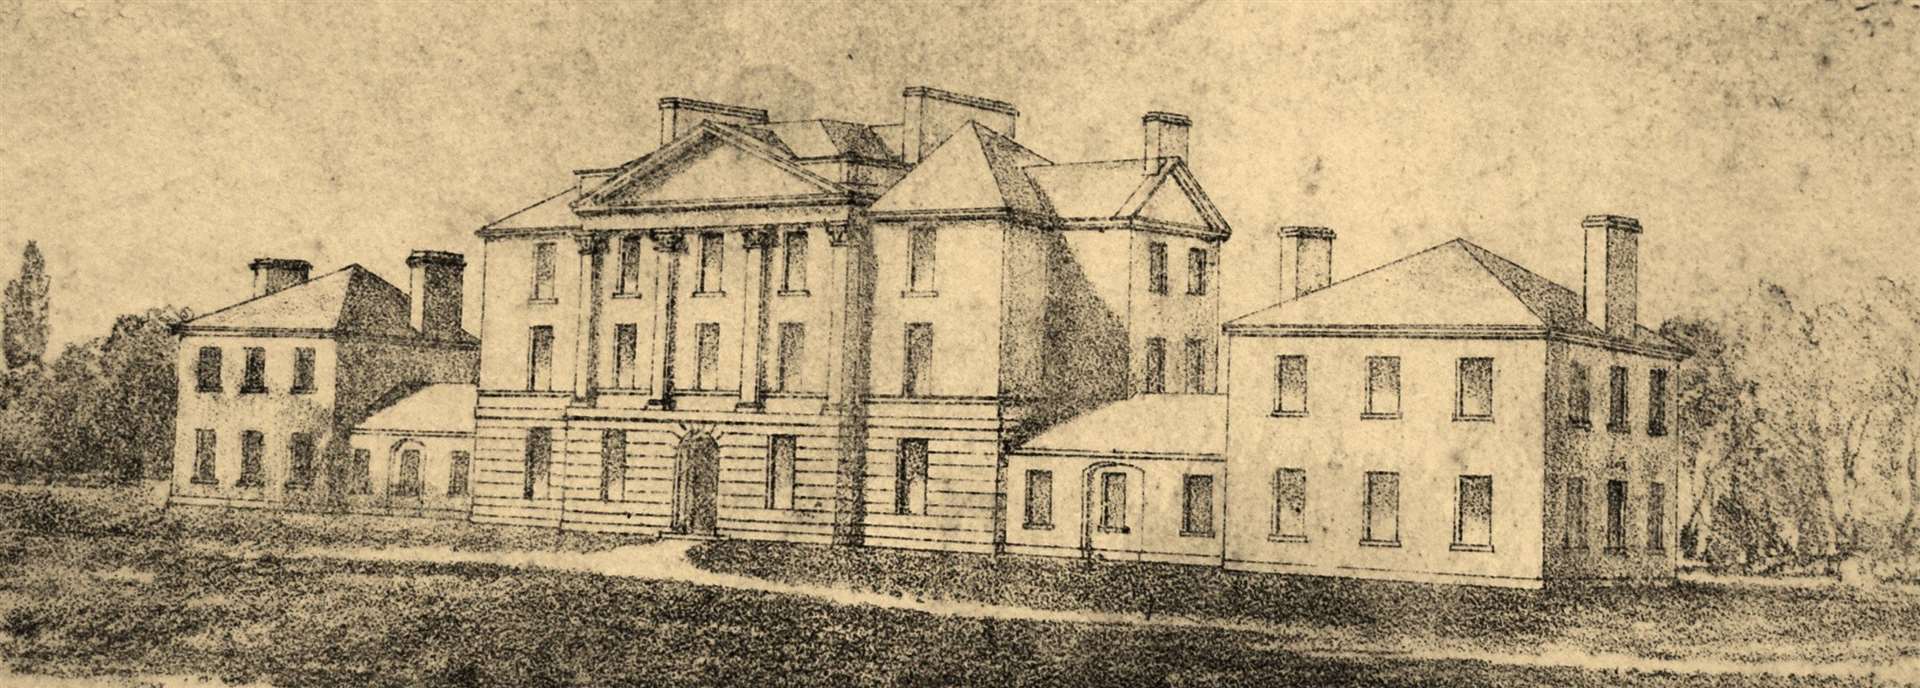 The building as it appeared in 1804.